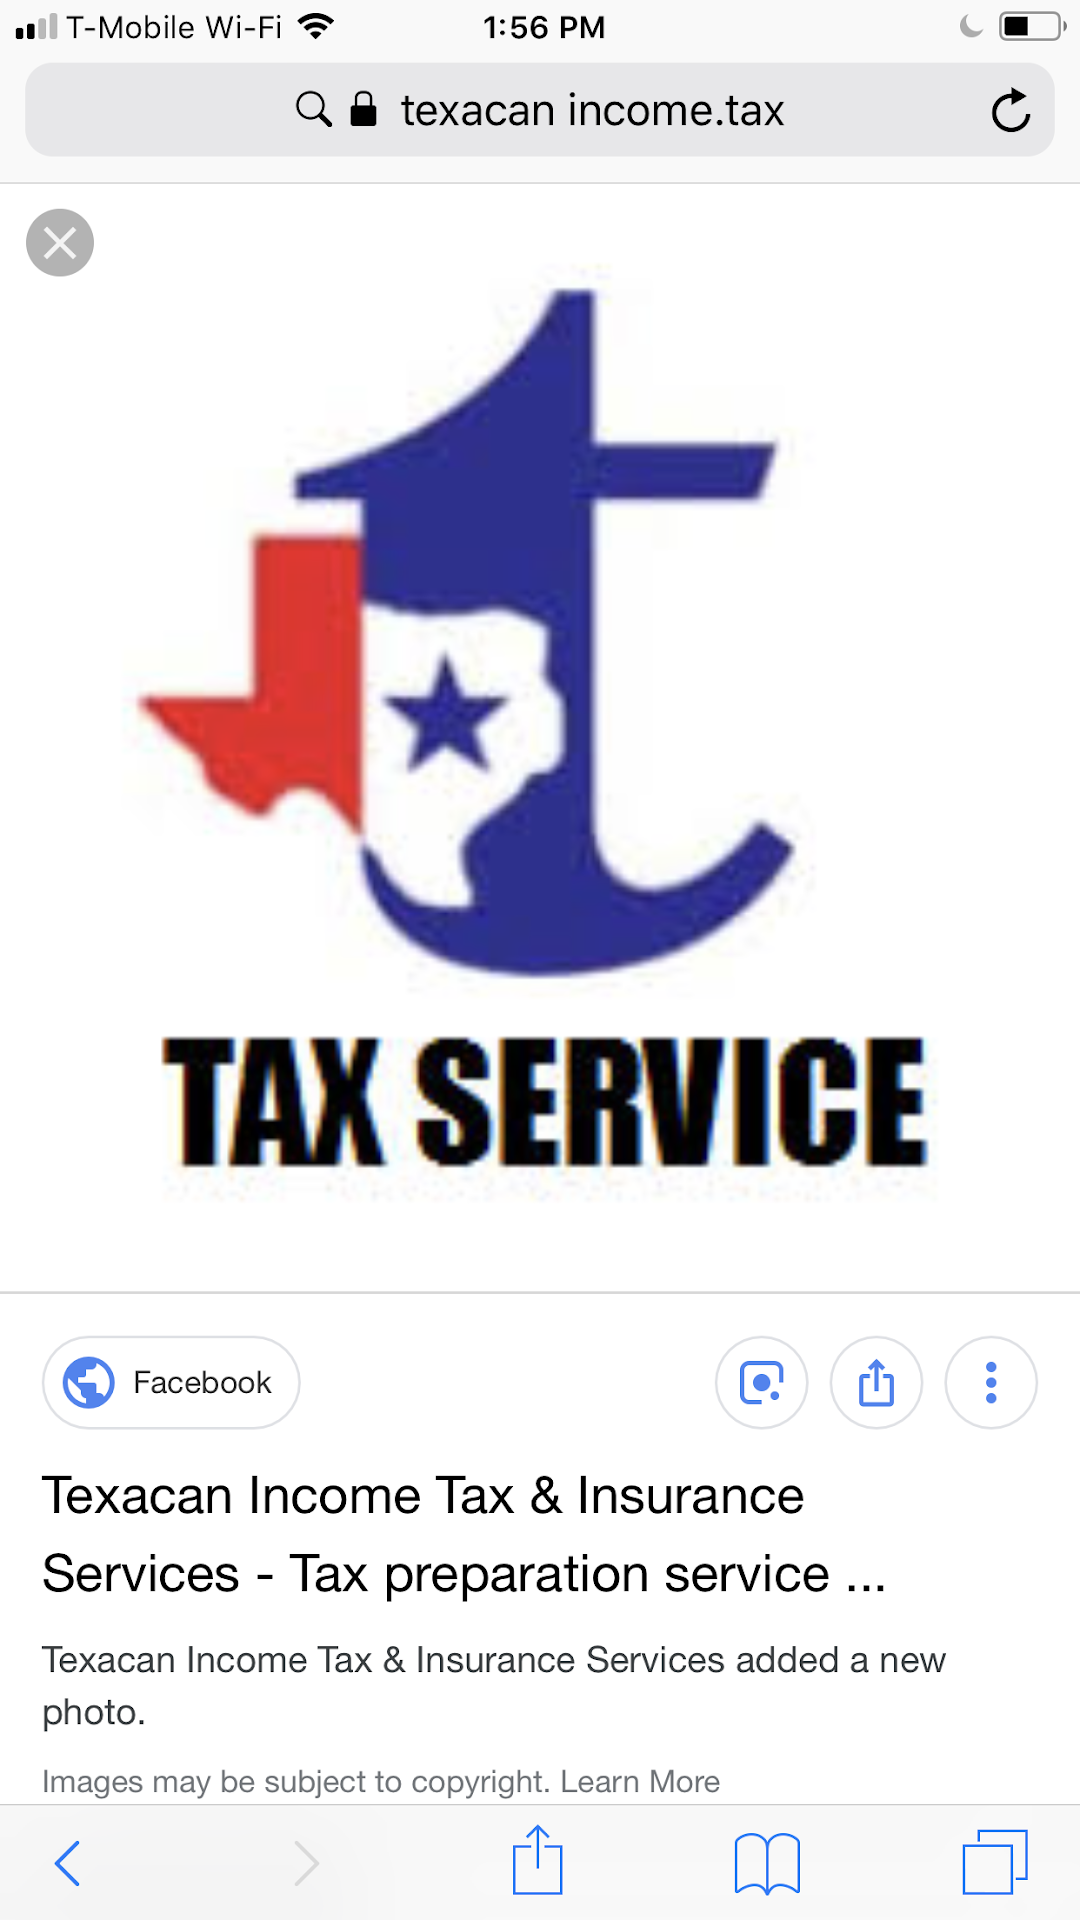 Texacan Income Tax & Insurance Services